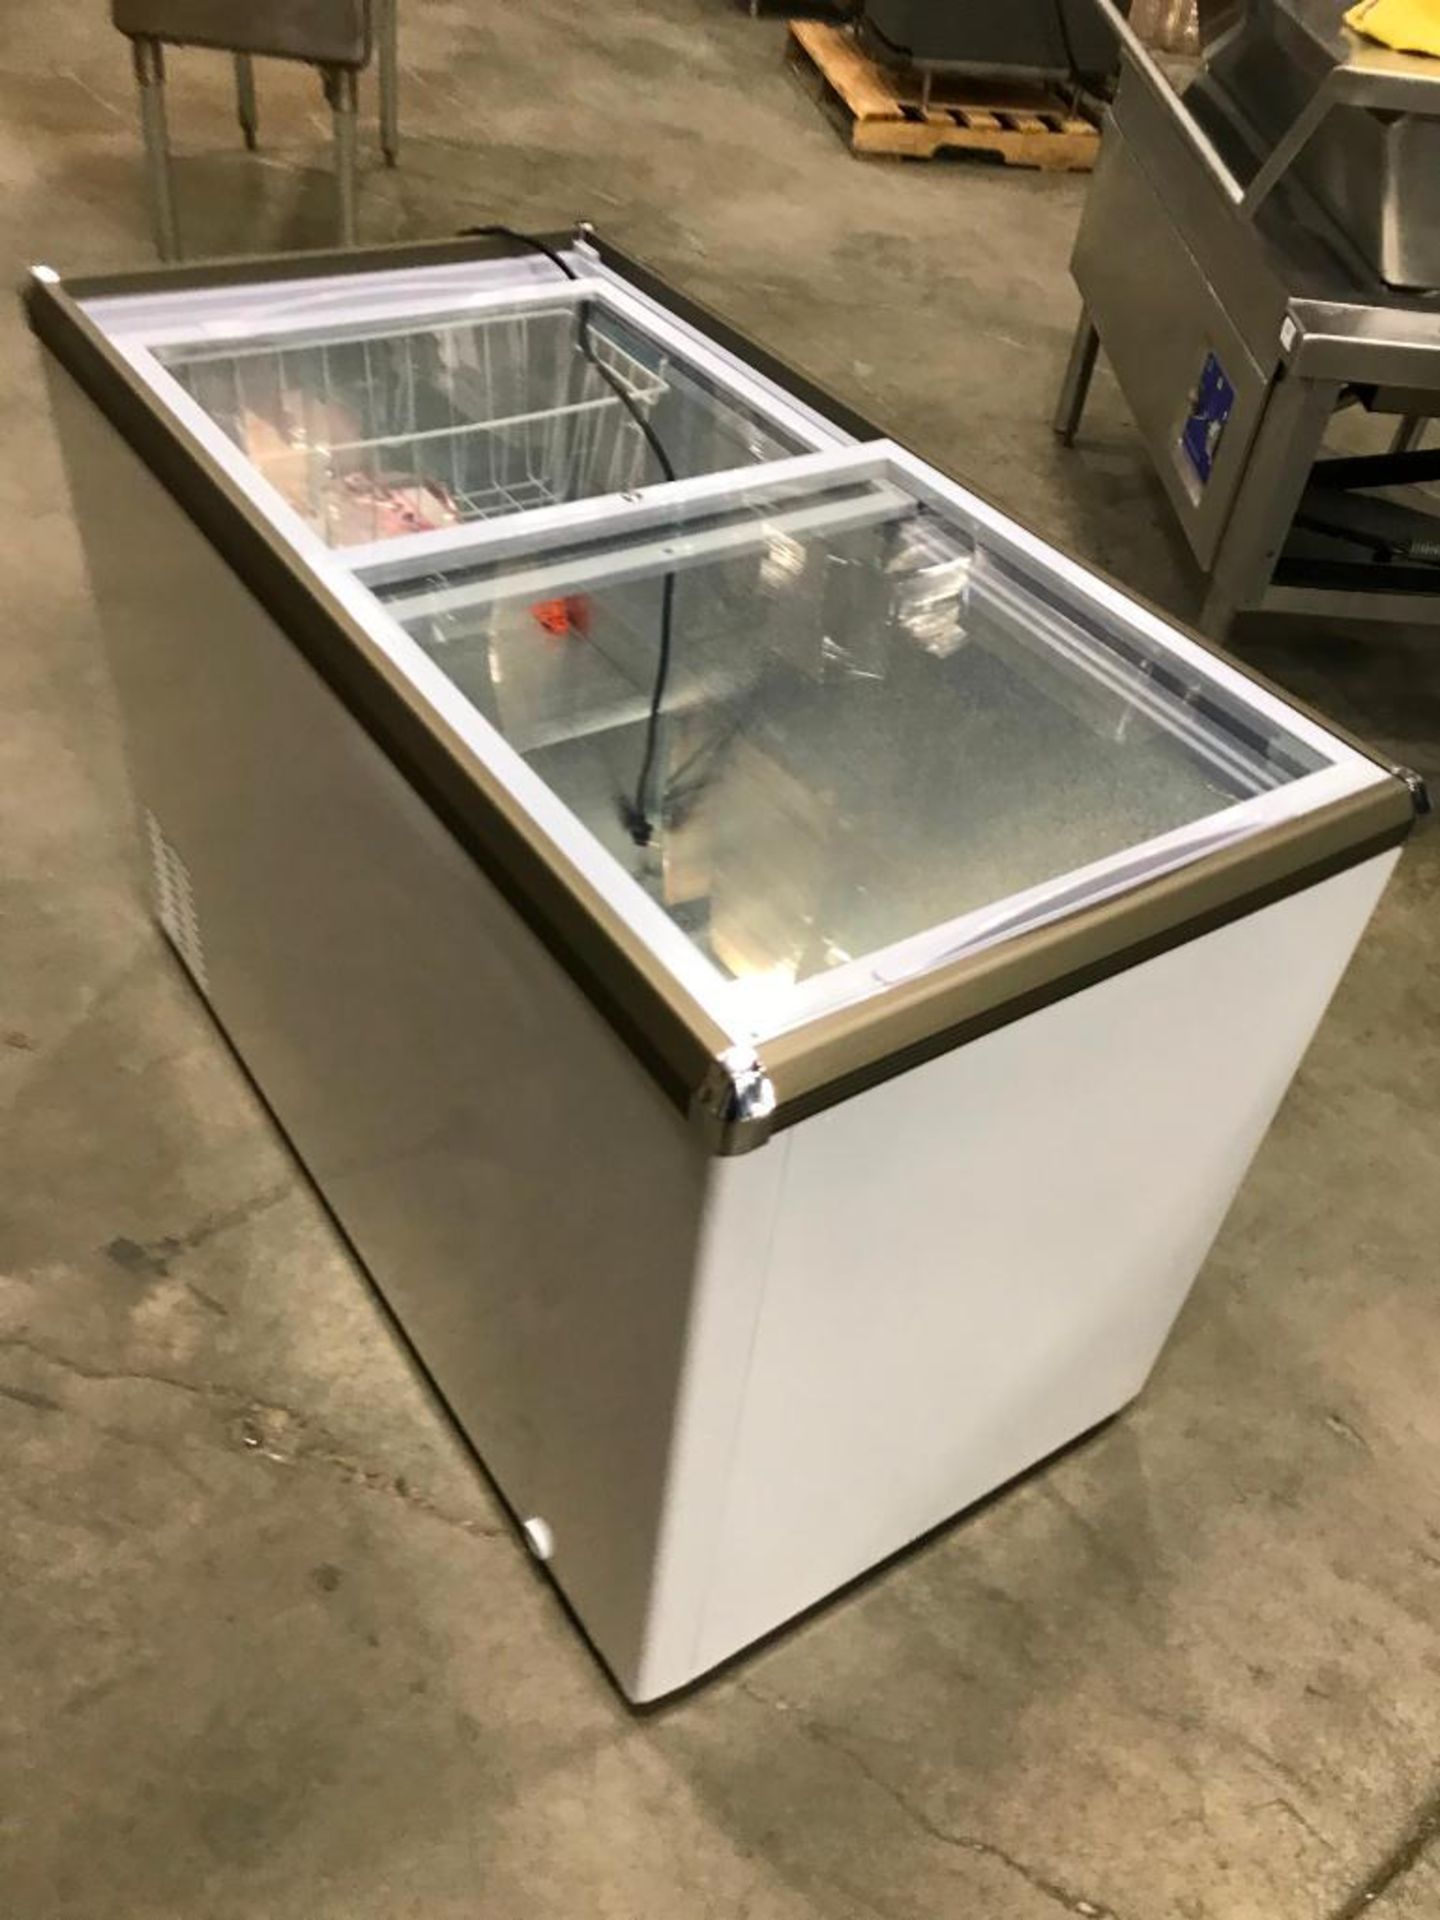 45.7" ICE CREAM DISPLAY CHEST FREEZER WITH FLAT GLASS TOP - OMCAN 45293 - Image 9 of 9